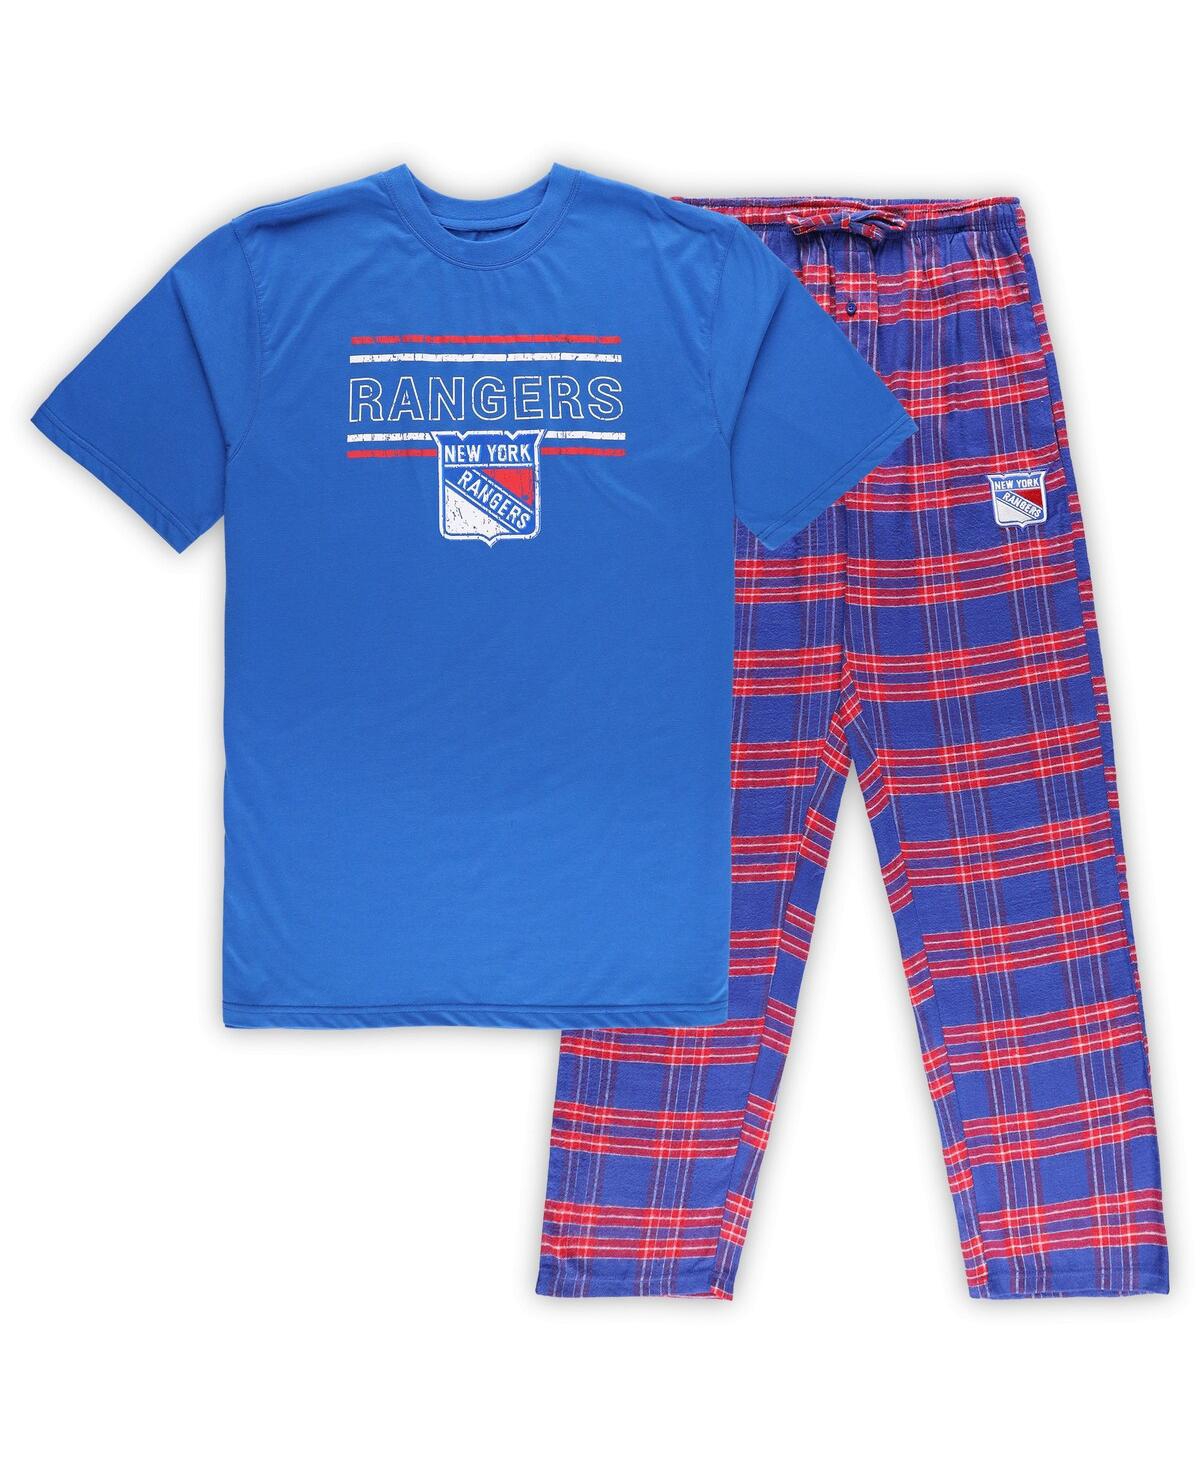 Men's Blue, Red New York Rangers Big and Tall T-shirt and Pajama Pants Sleep Set - Blue, Red